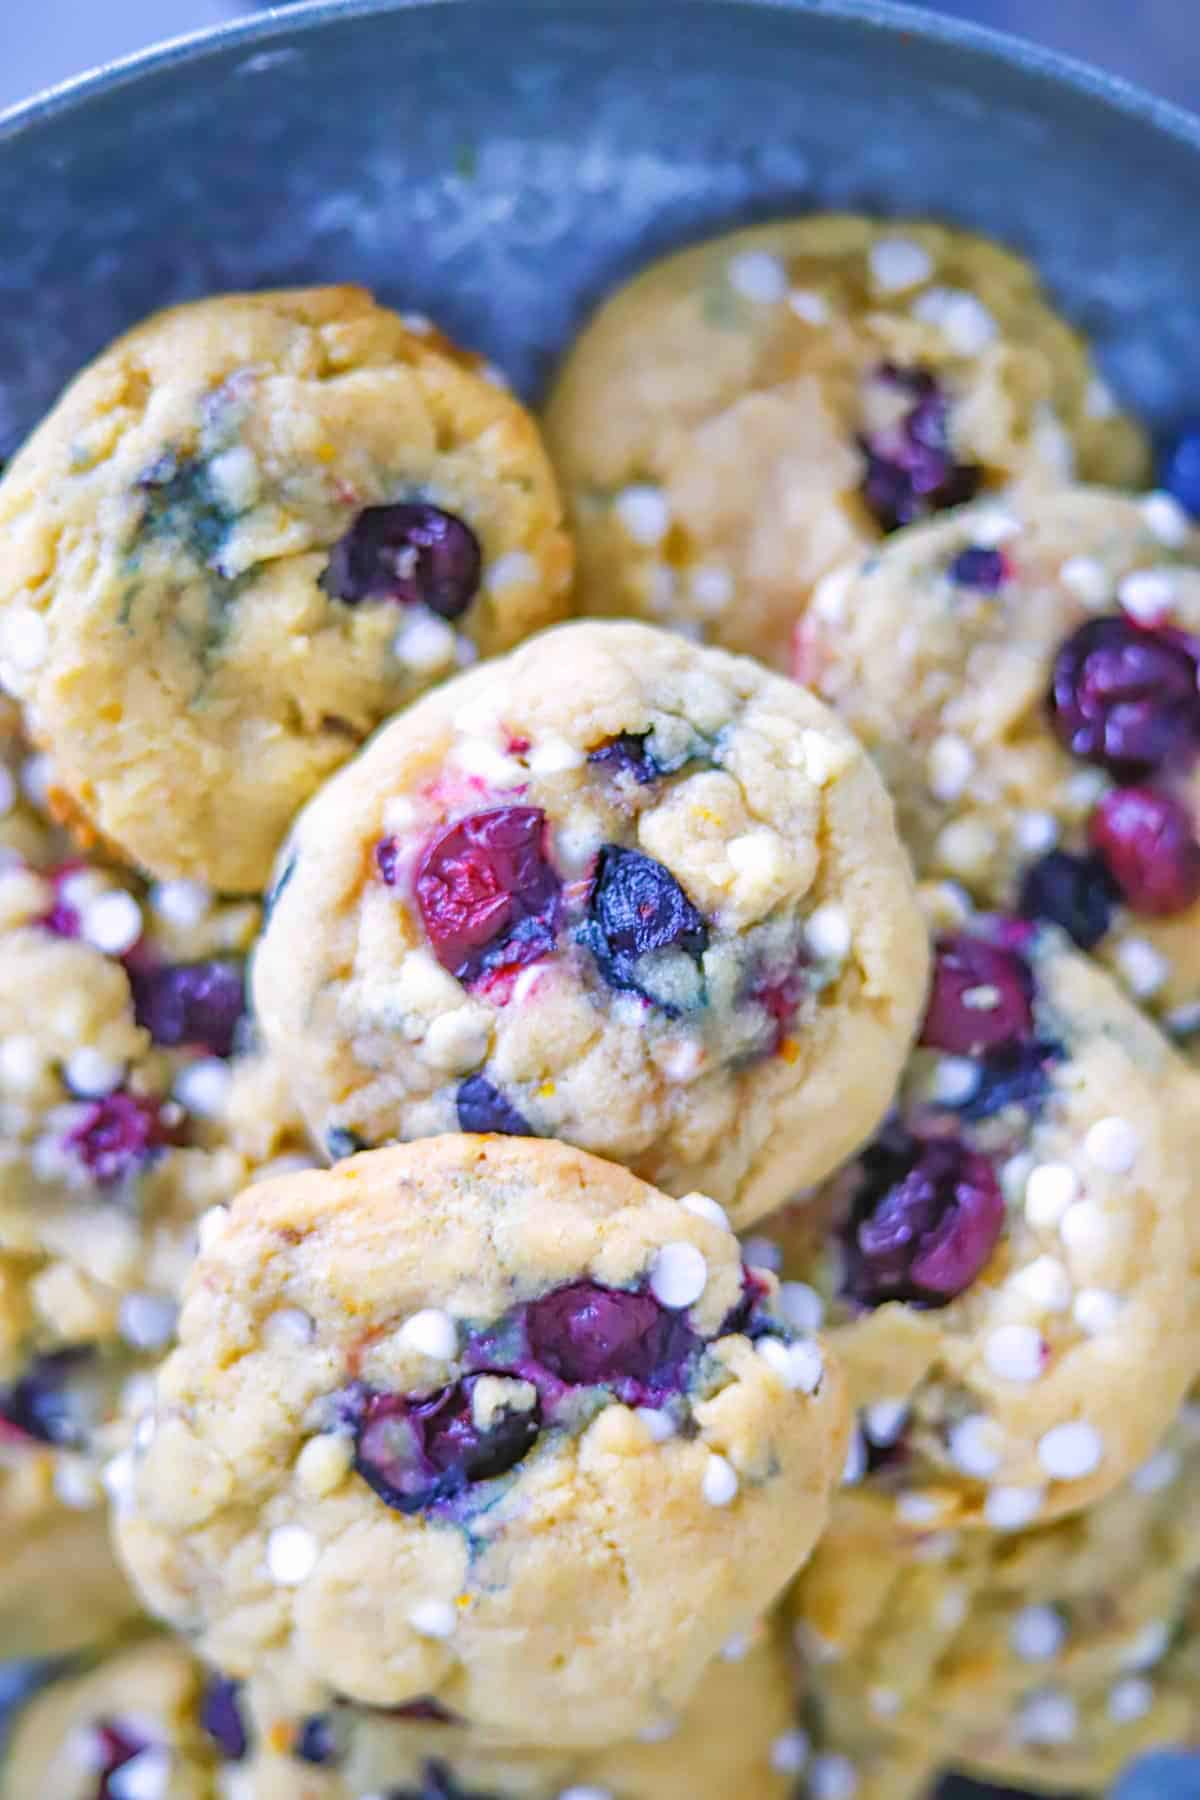 Yummy Blueberry White Chocolate Cookies